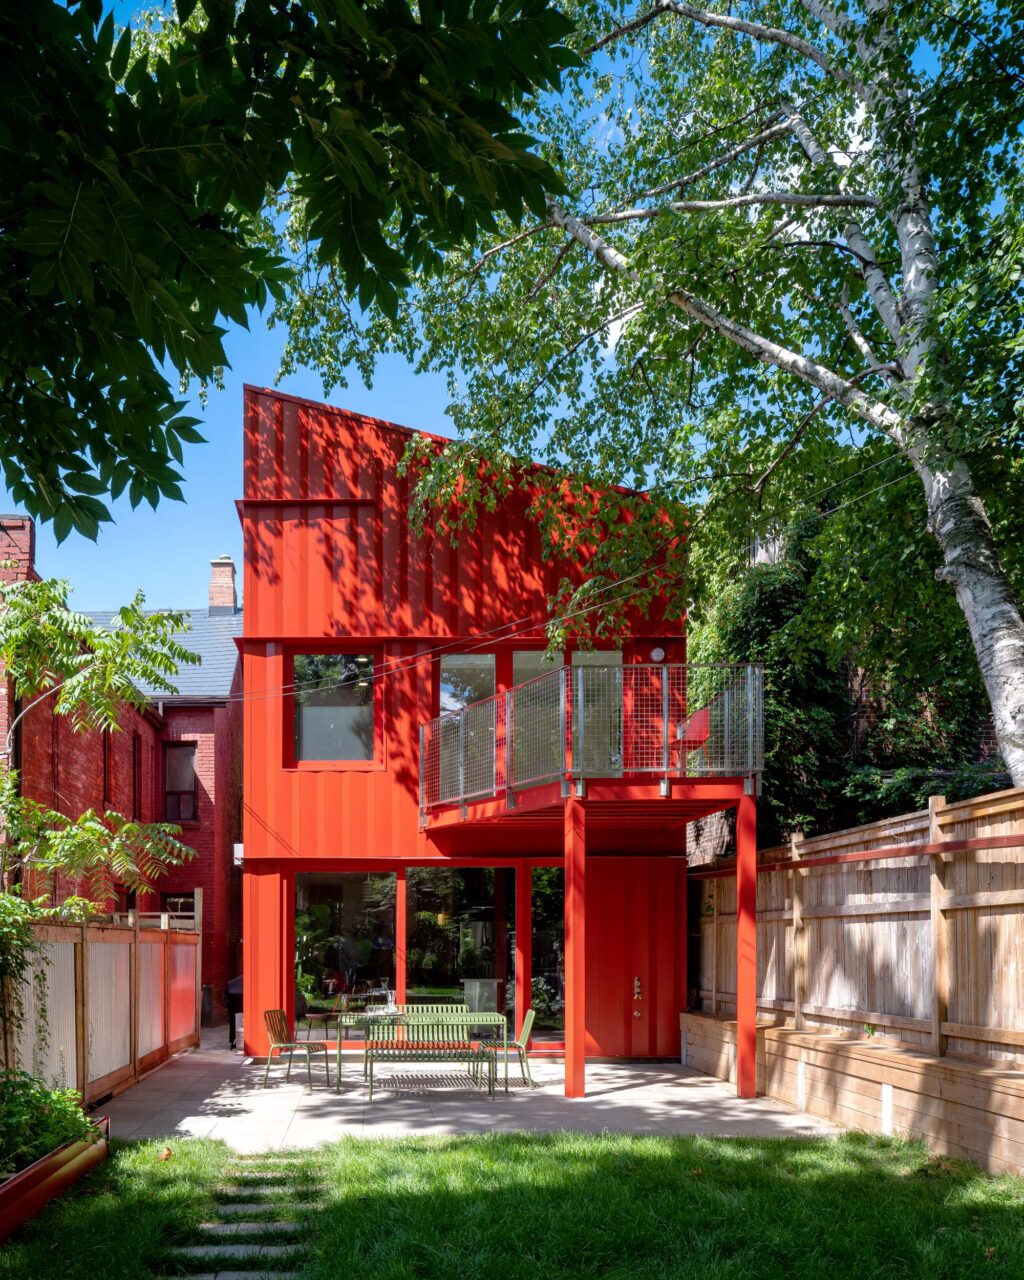 A back of the house is a red steel expansion